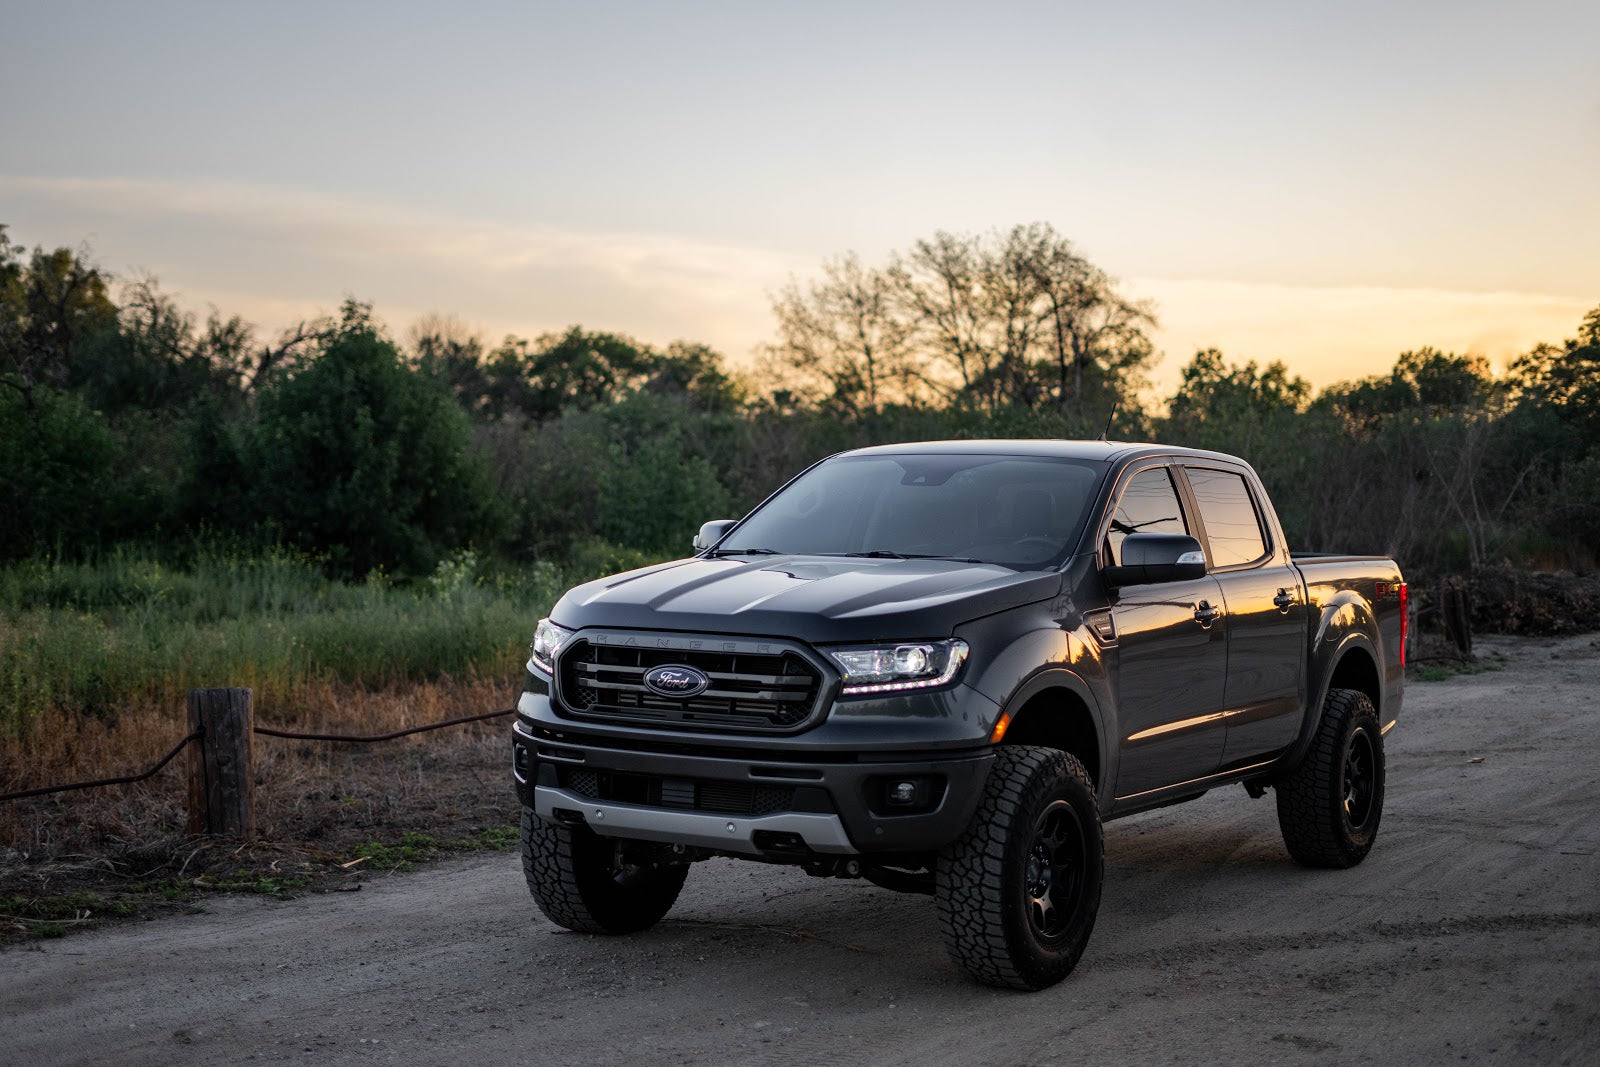 2019 Ford Ranger review A midsize truck champ  CNET